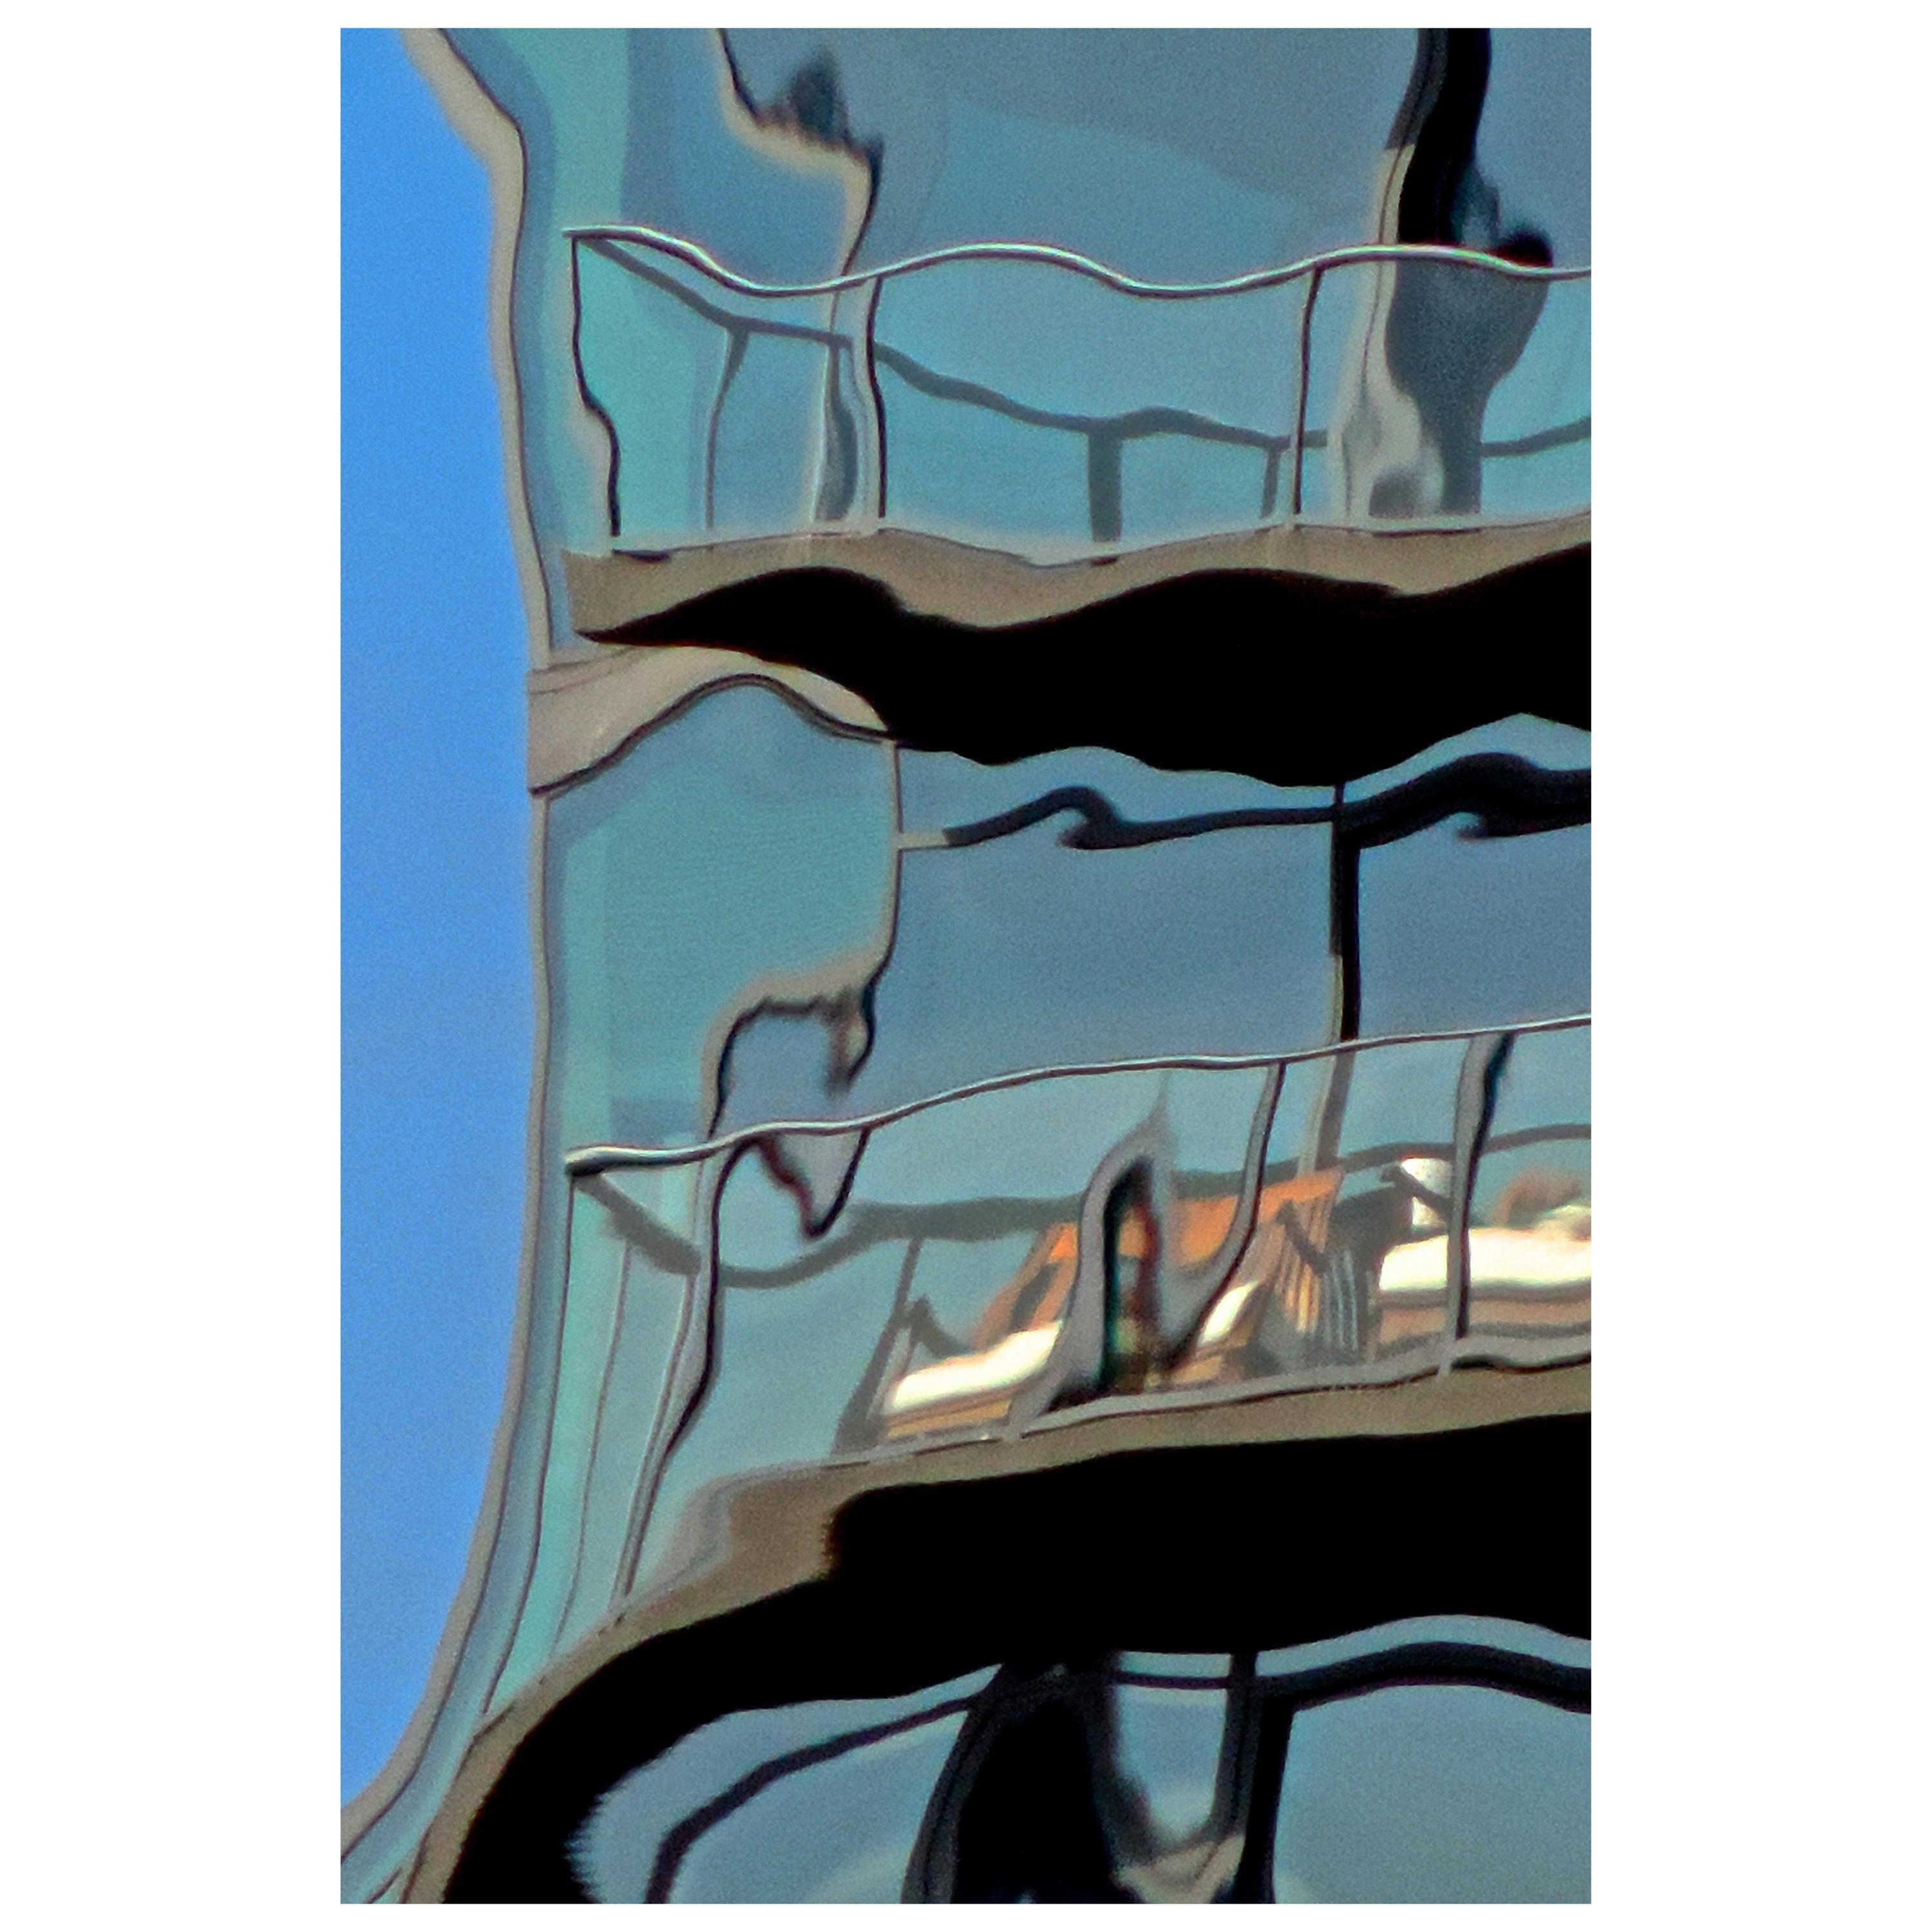 Architecture Blue Glass Reflection Digital Photographic Print by Dave Lasker For Sale